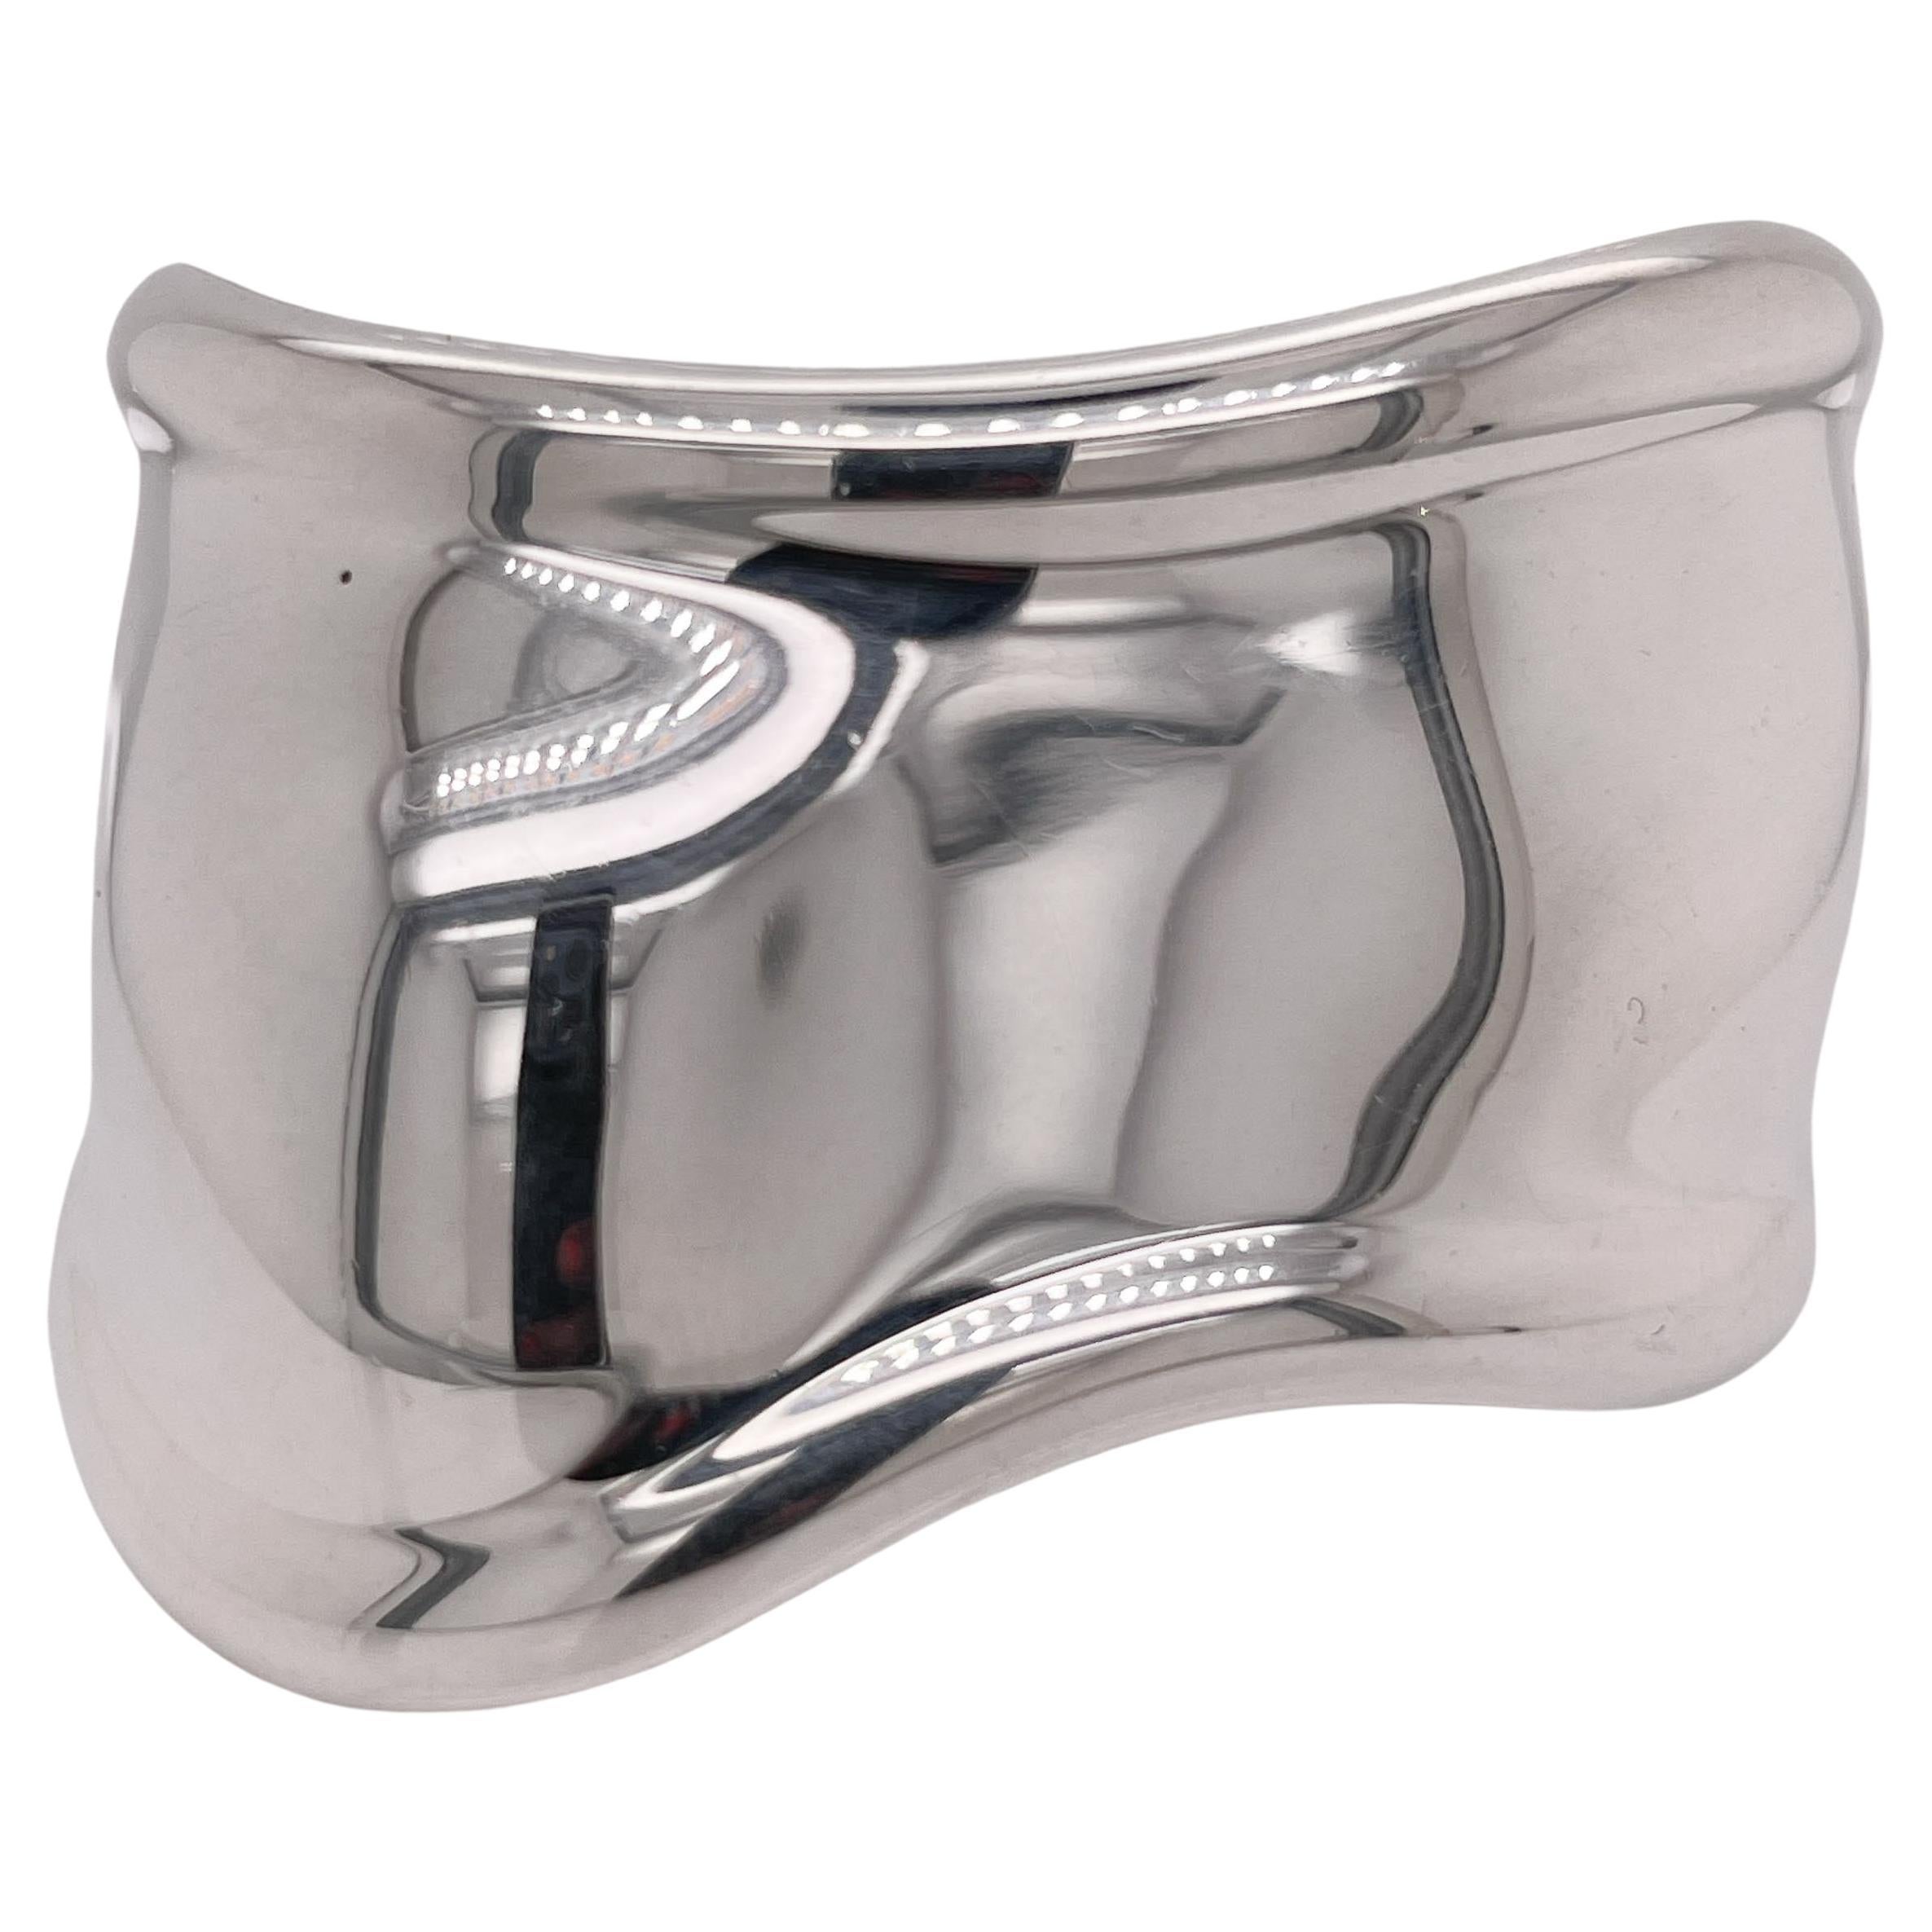 A fine, vintage Tiffany & Co. Bone cuff bracelet.

In sterling silver for the right hand.

Designed by Elsa Peretti. 

Simply an iconic bracelet!

Date:
Late 20th Century

Overall Condition:
It is in overall good, as-pictured, used estate condition